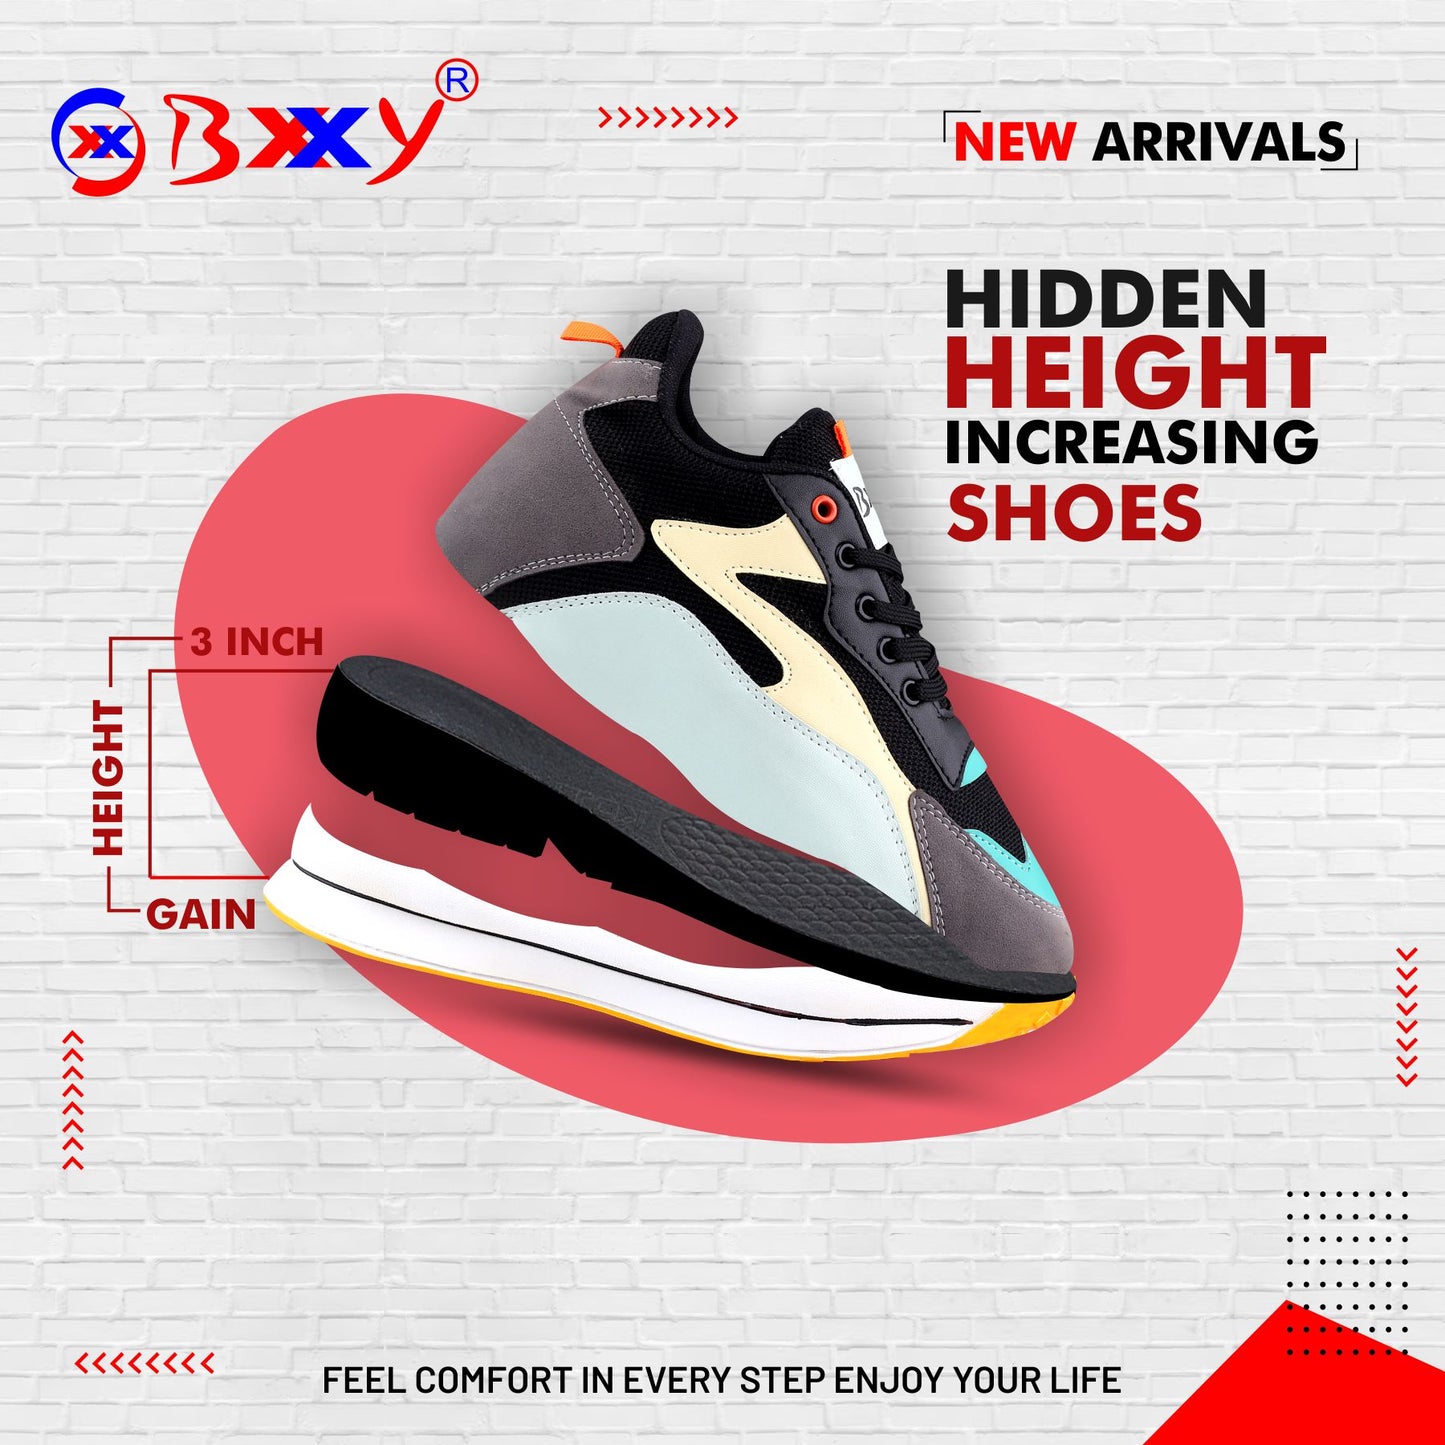 Bxxy Men's Stylish 3 Inch Hidden Height Increasing Casual Sports Lace-Up Shoes.